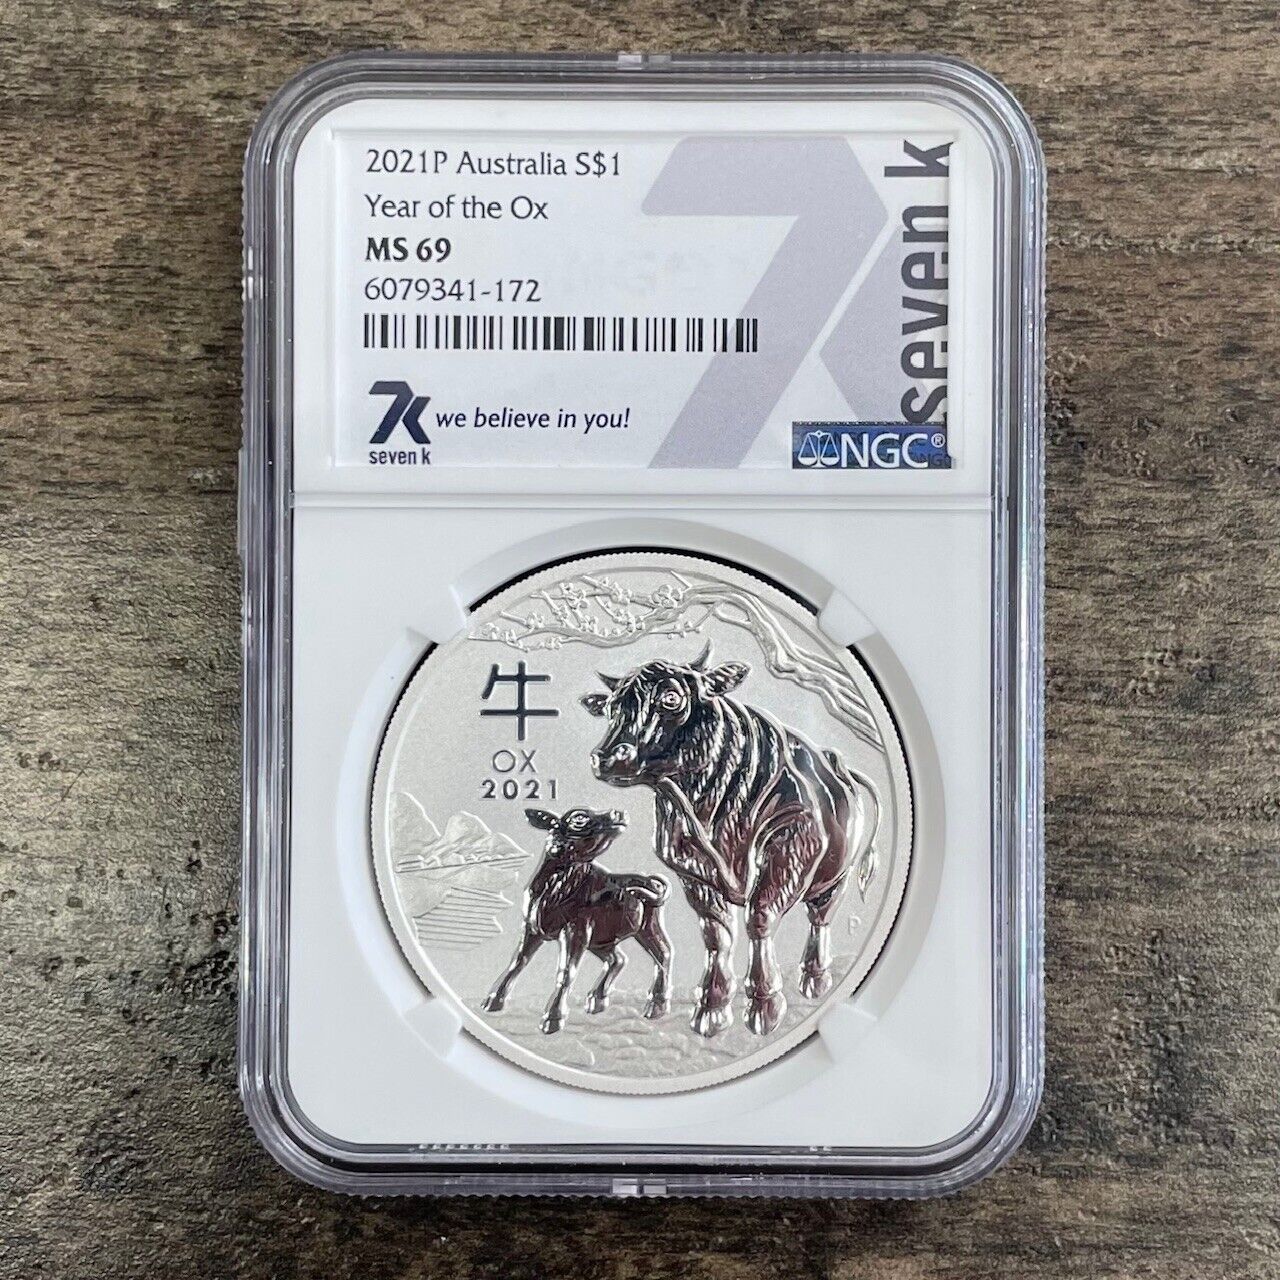 2021 P Australia $1 Year of the Ox 1 oz Silver NGC MS 69 7k Metals Coin